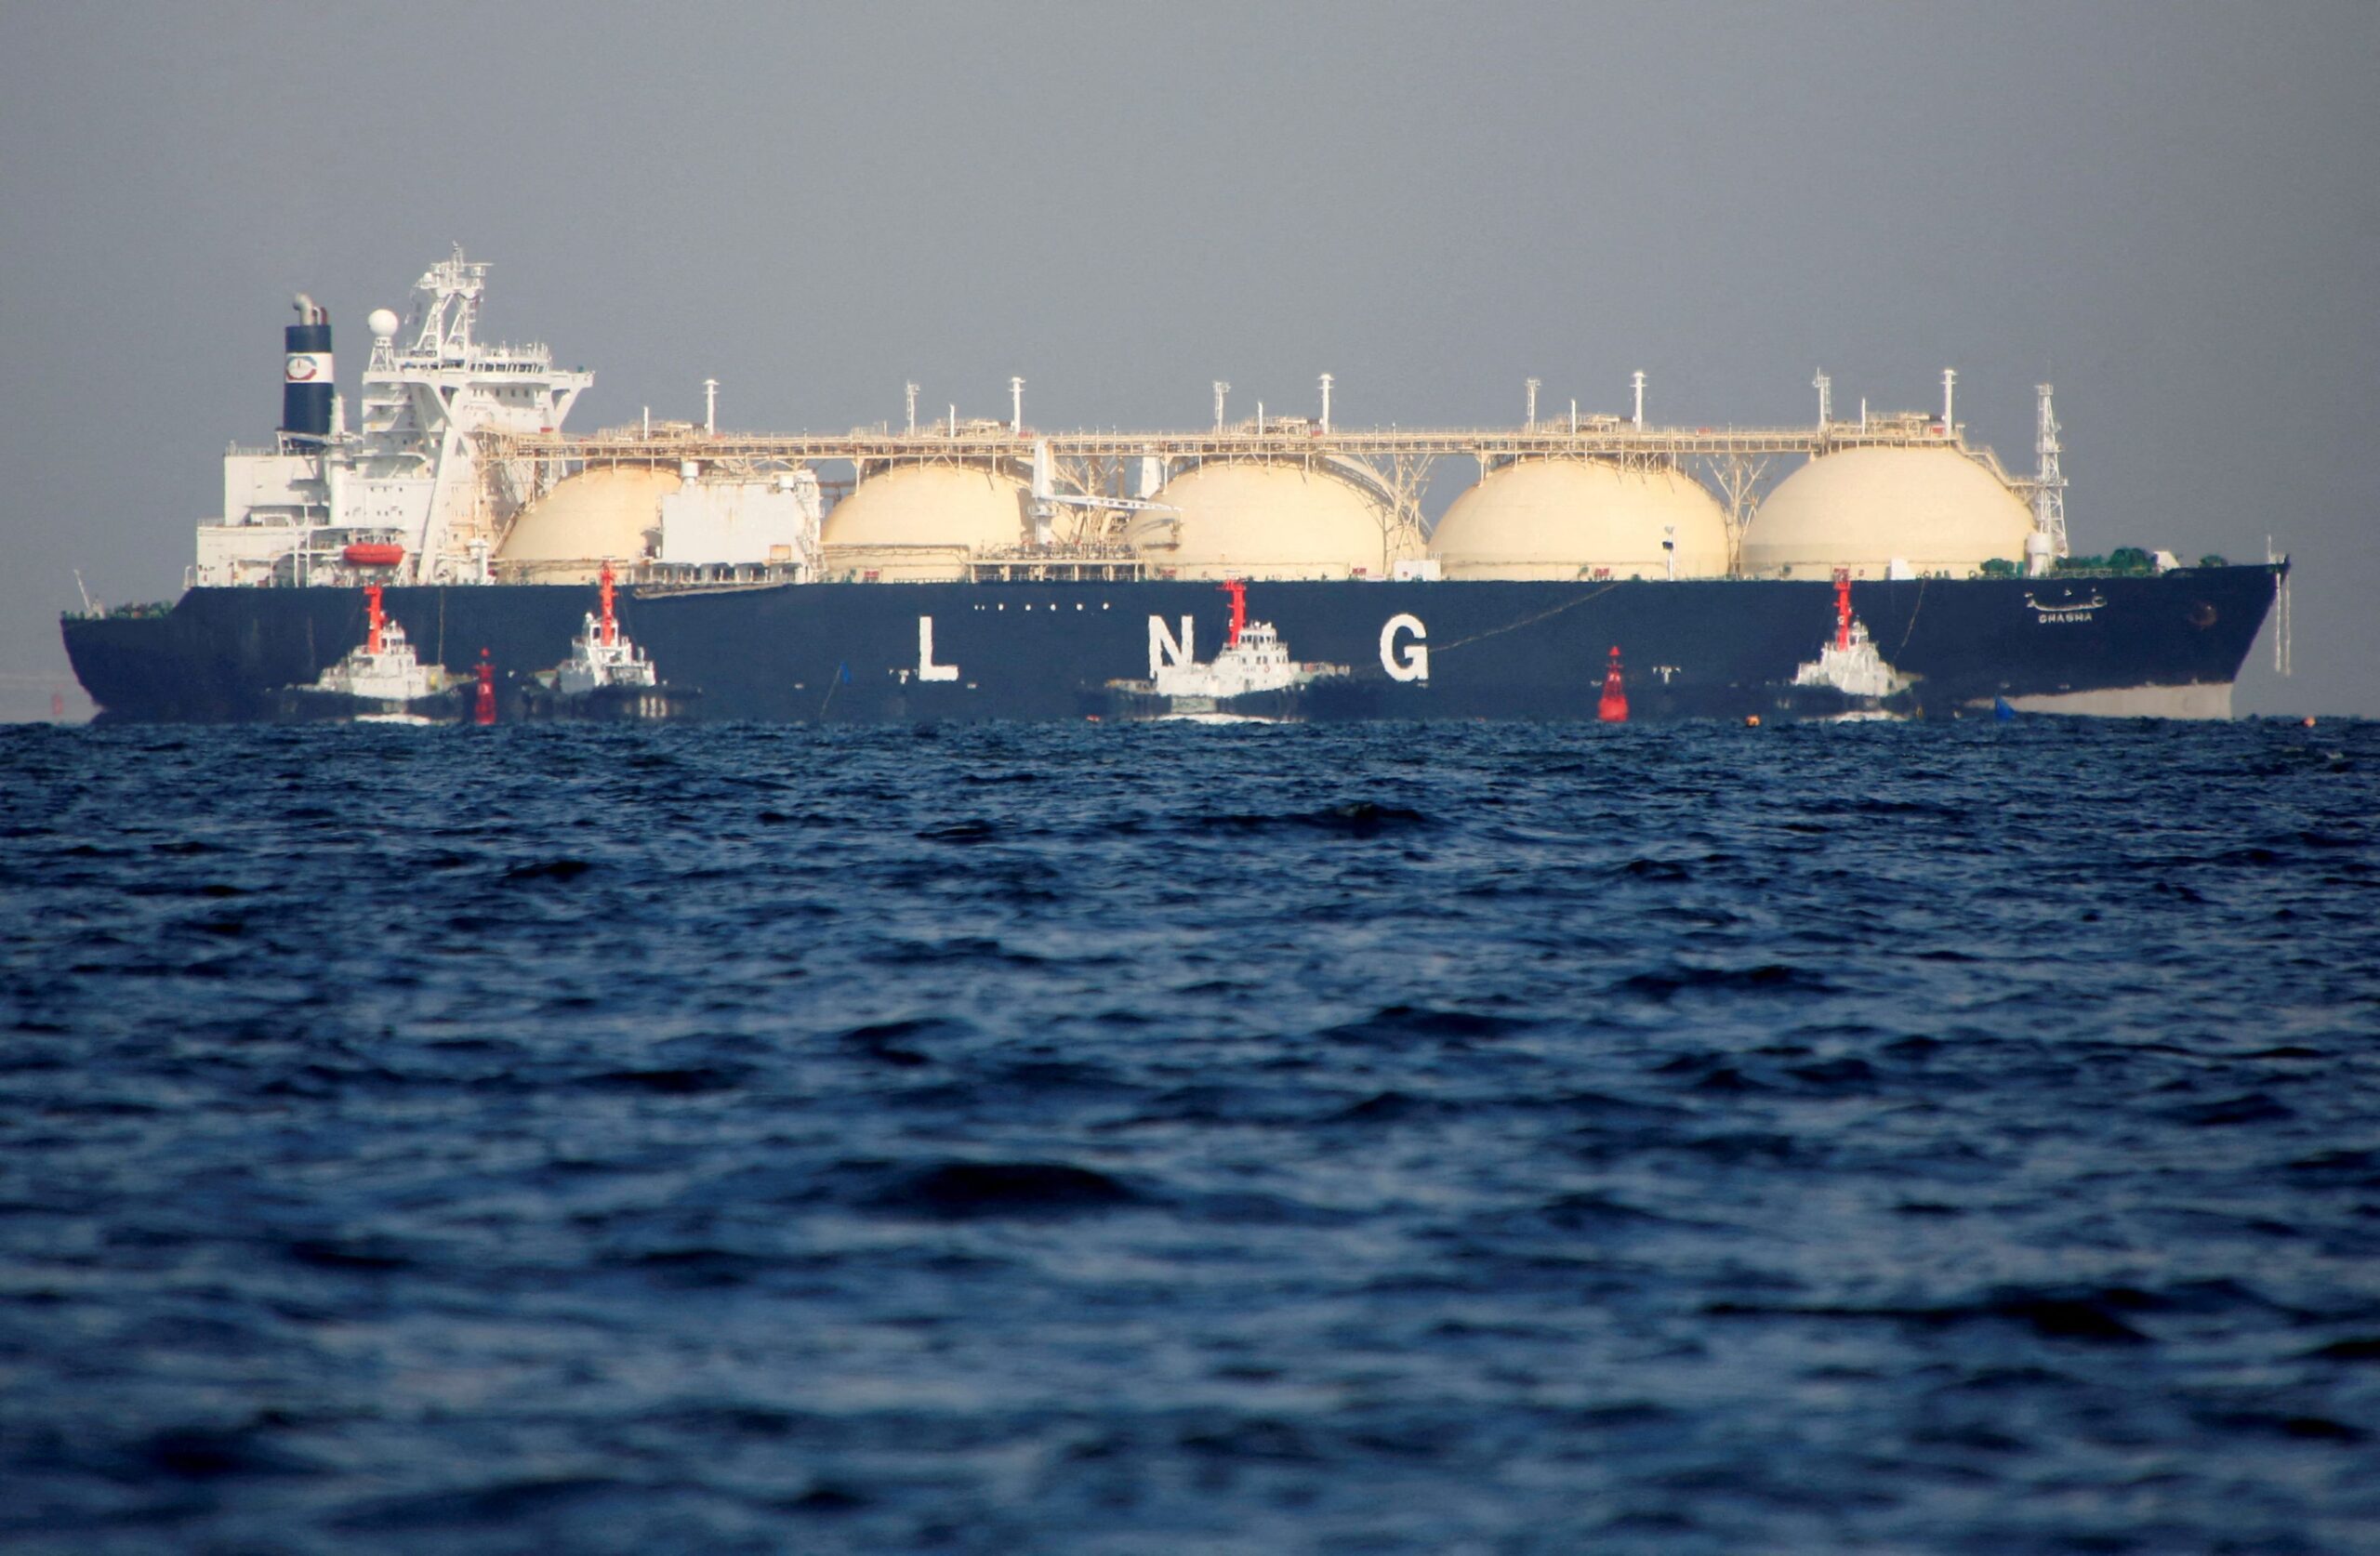 Qatar aims to expand its liquefaction capacity to 126 mtpa by 2027 from 77 mtpa